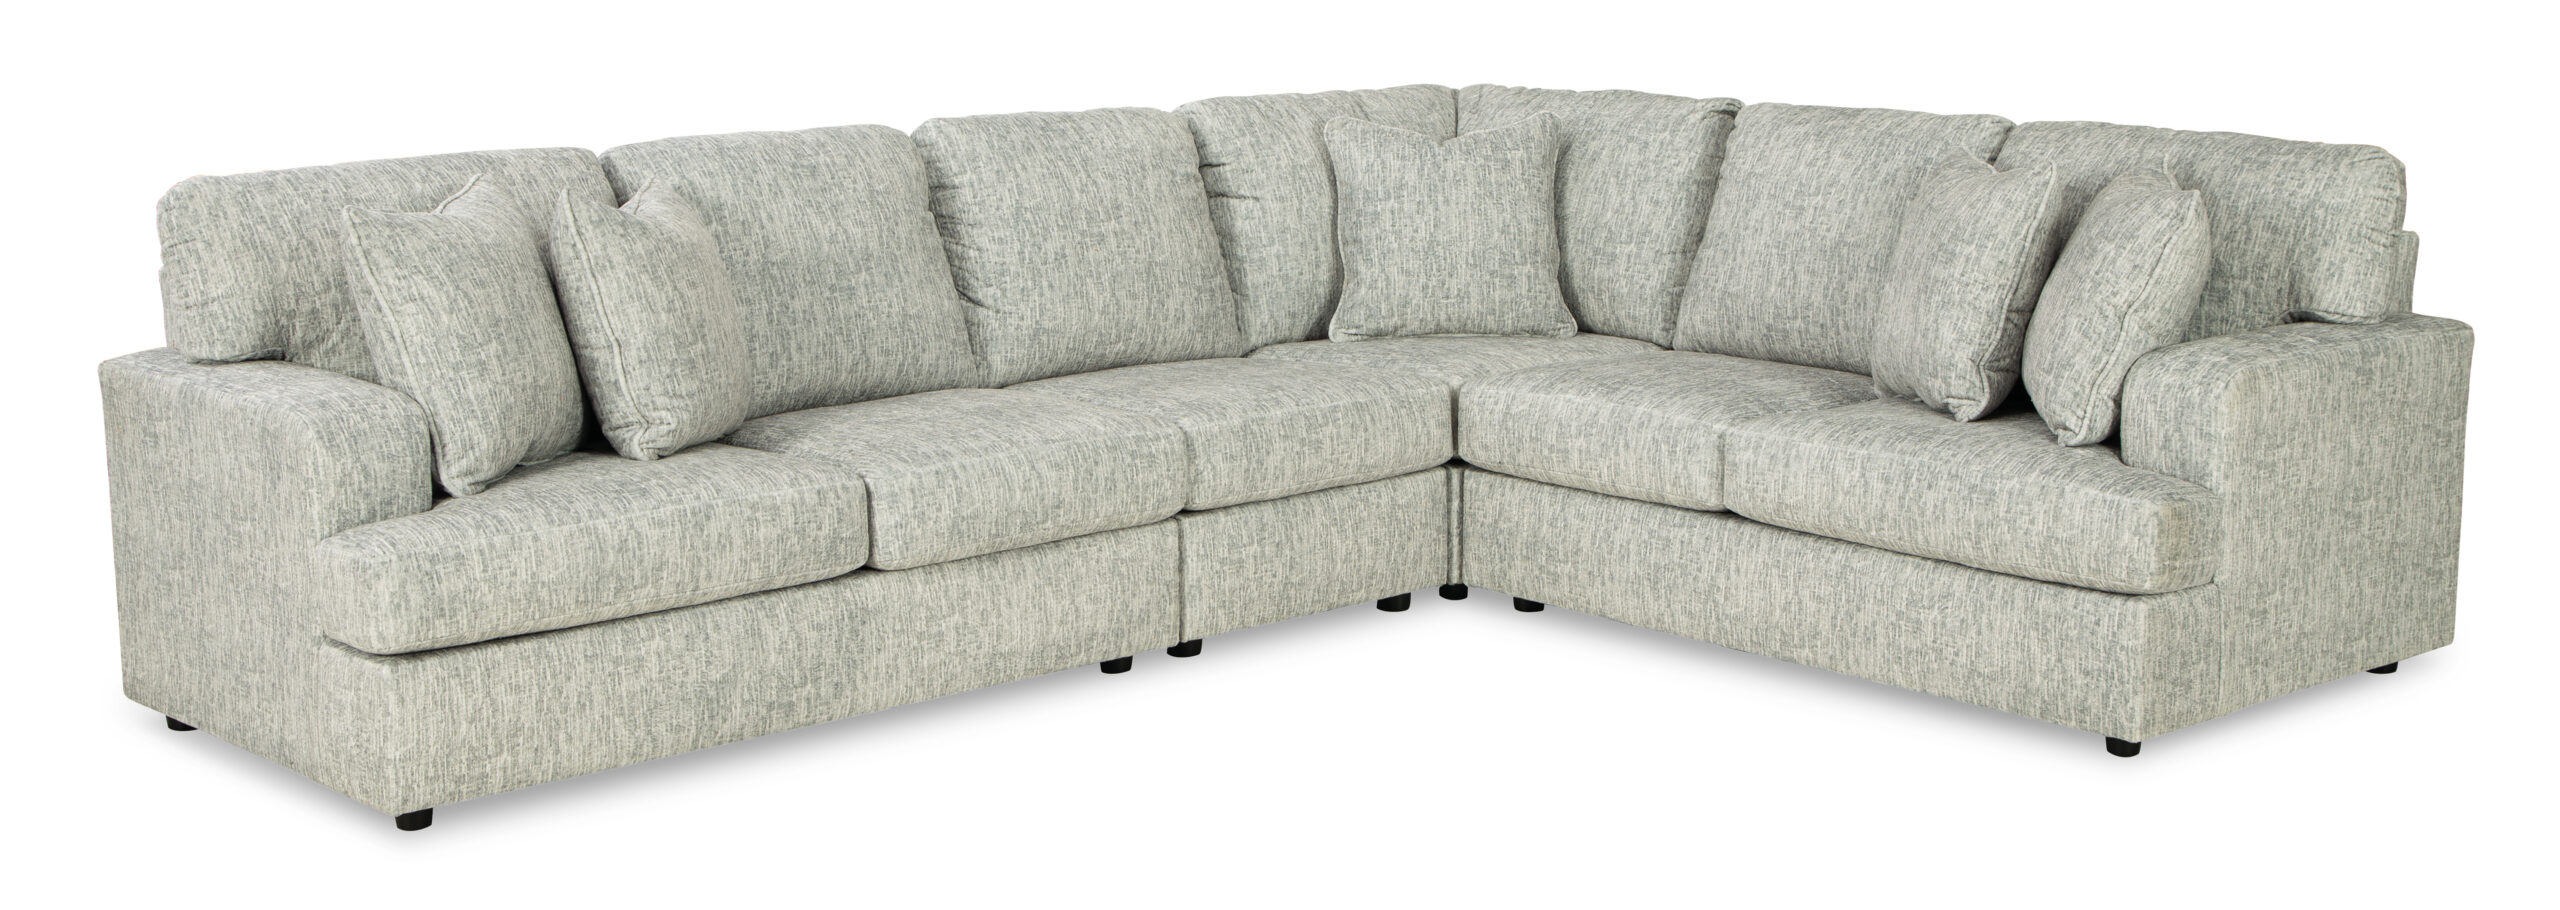 27304-46/55/56/77 Playwrite Sectional